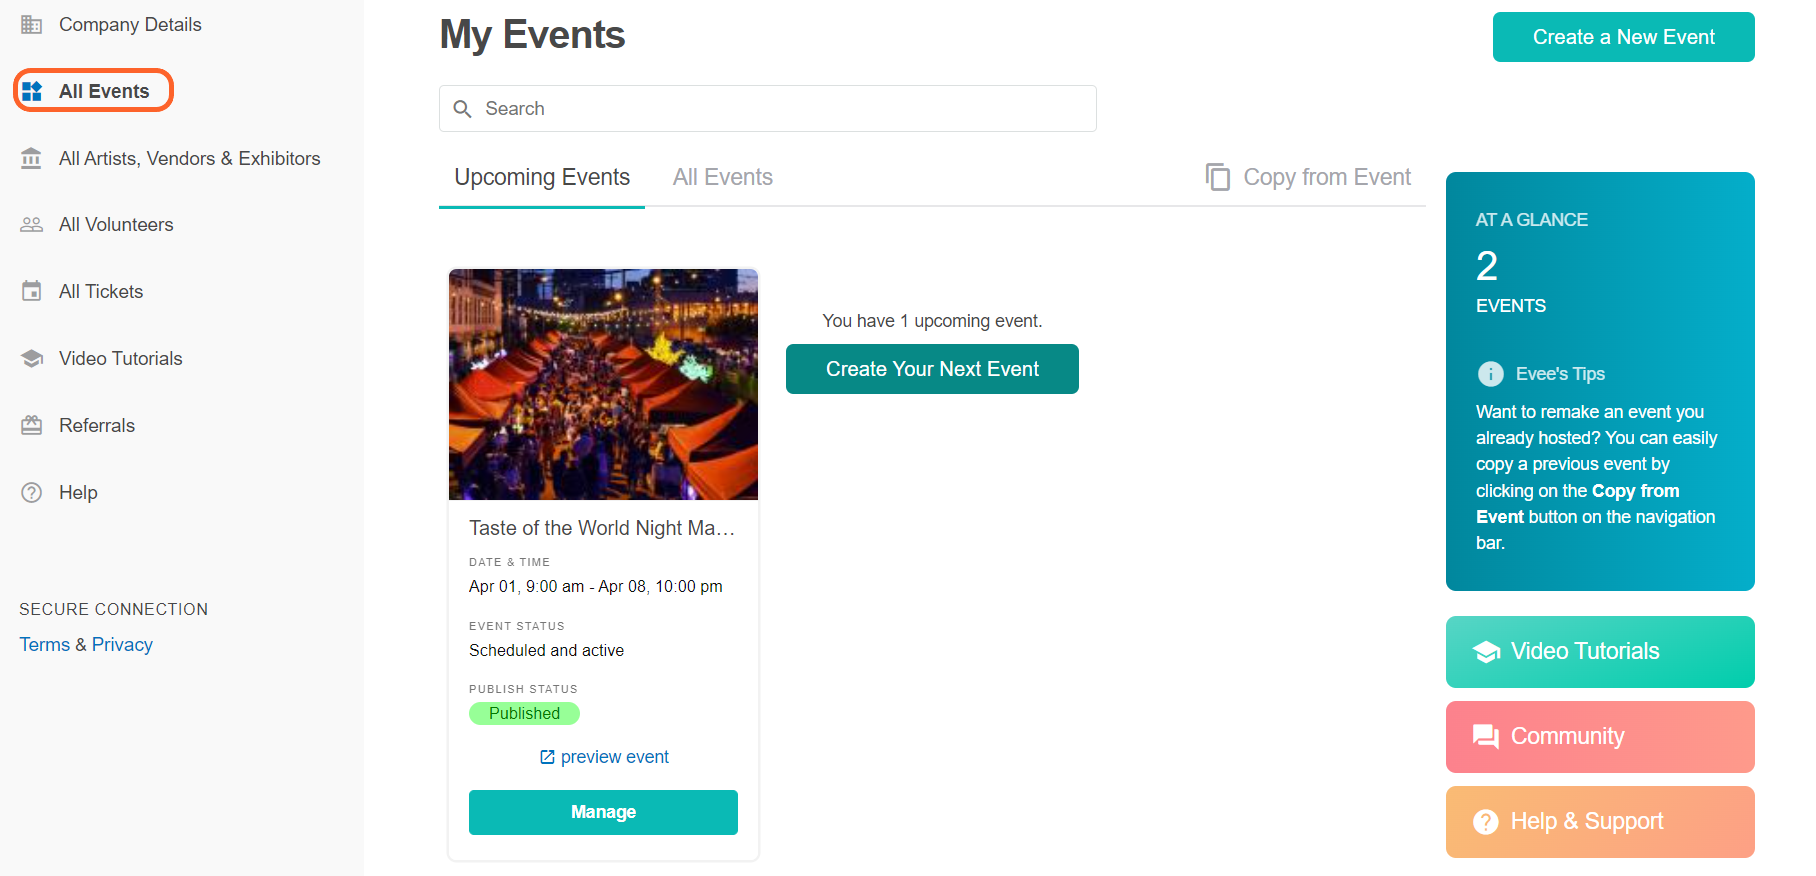 an image showing the My Events section from the beginning